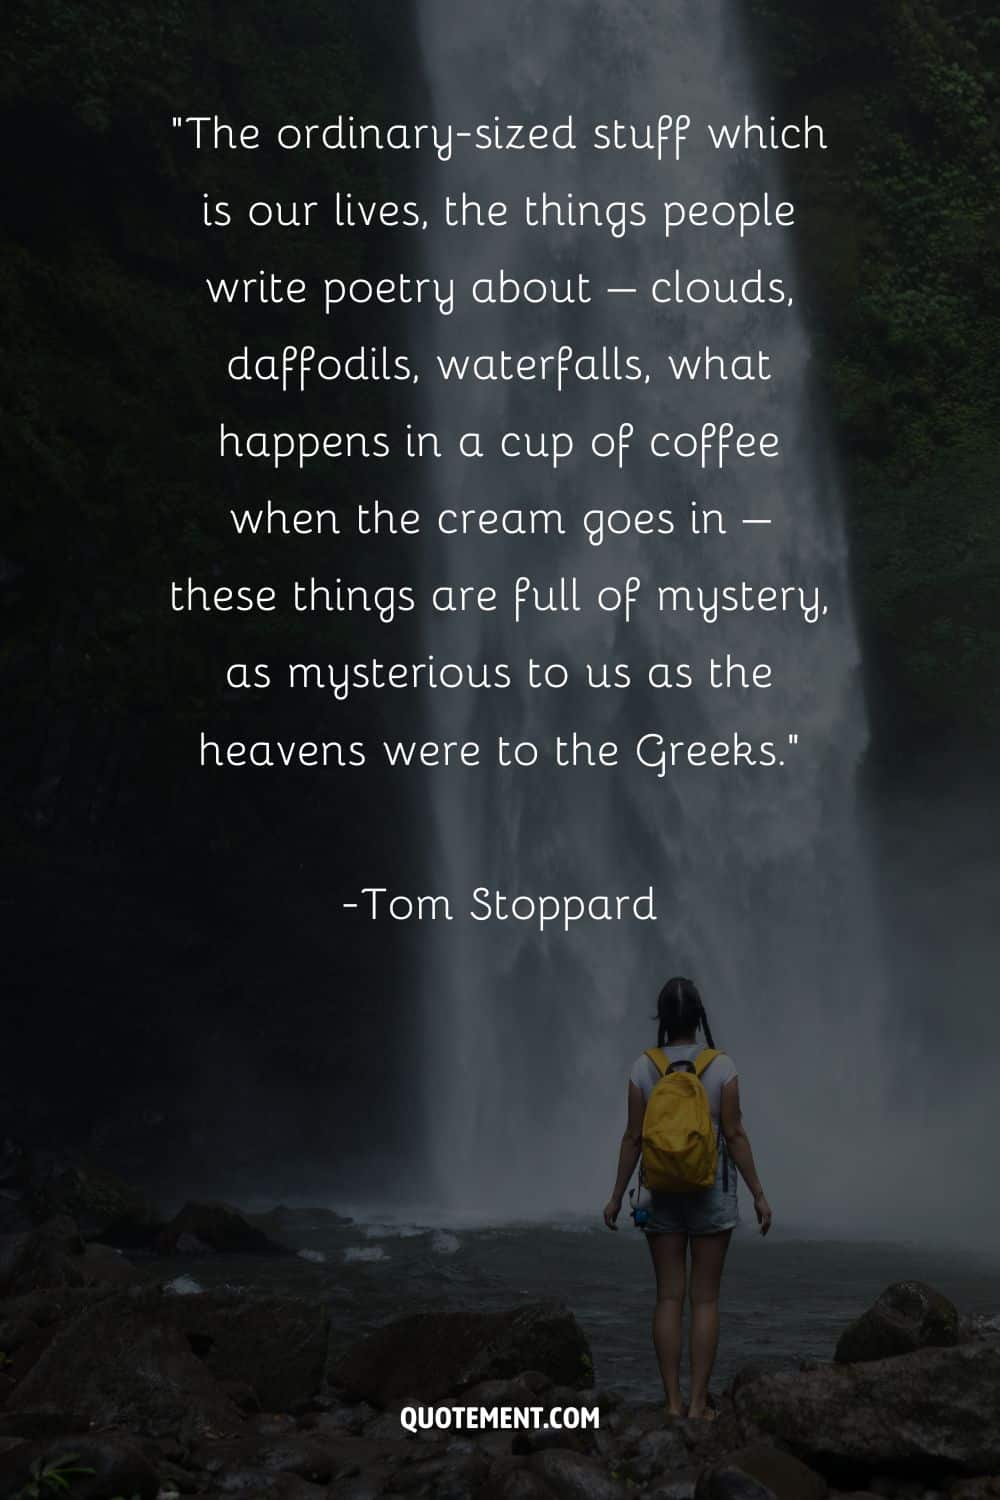 Amazing quote by Tom Stoppard and a woman by the waterfall in the background as well
